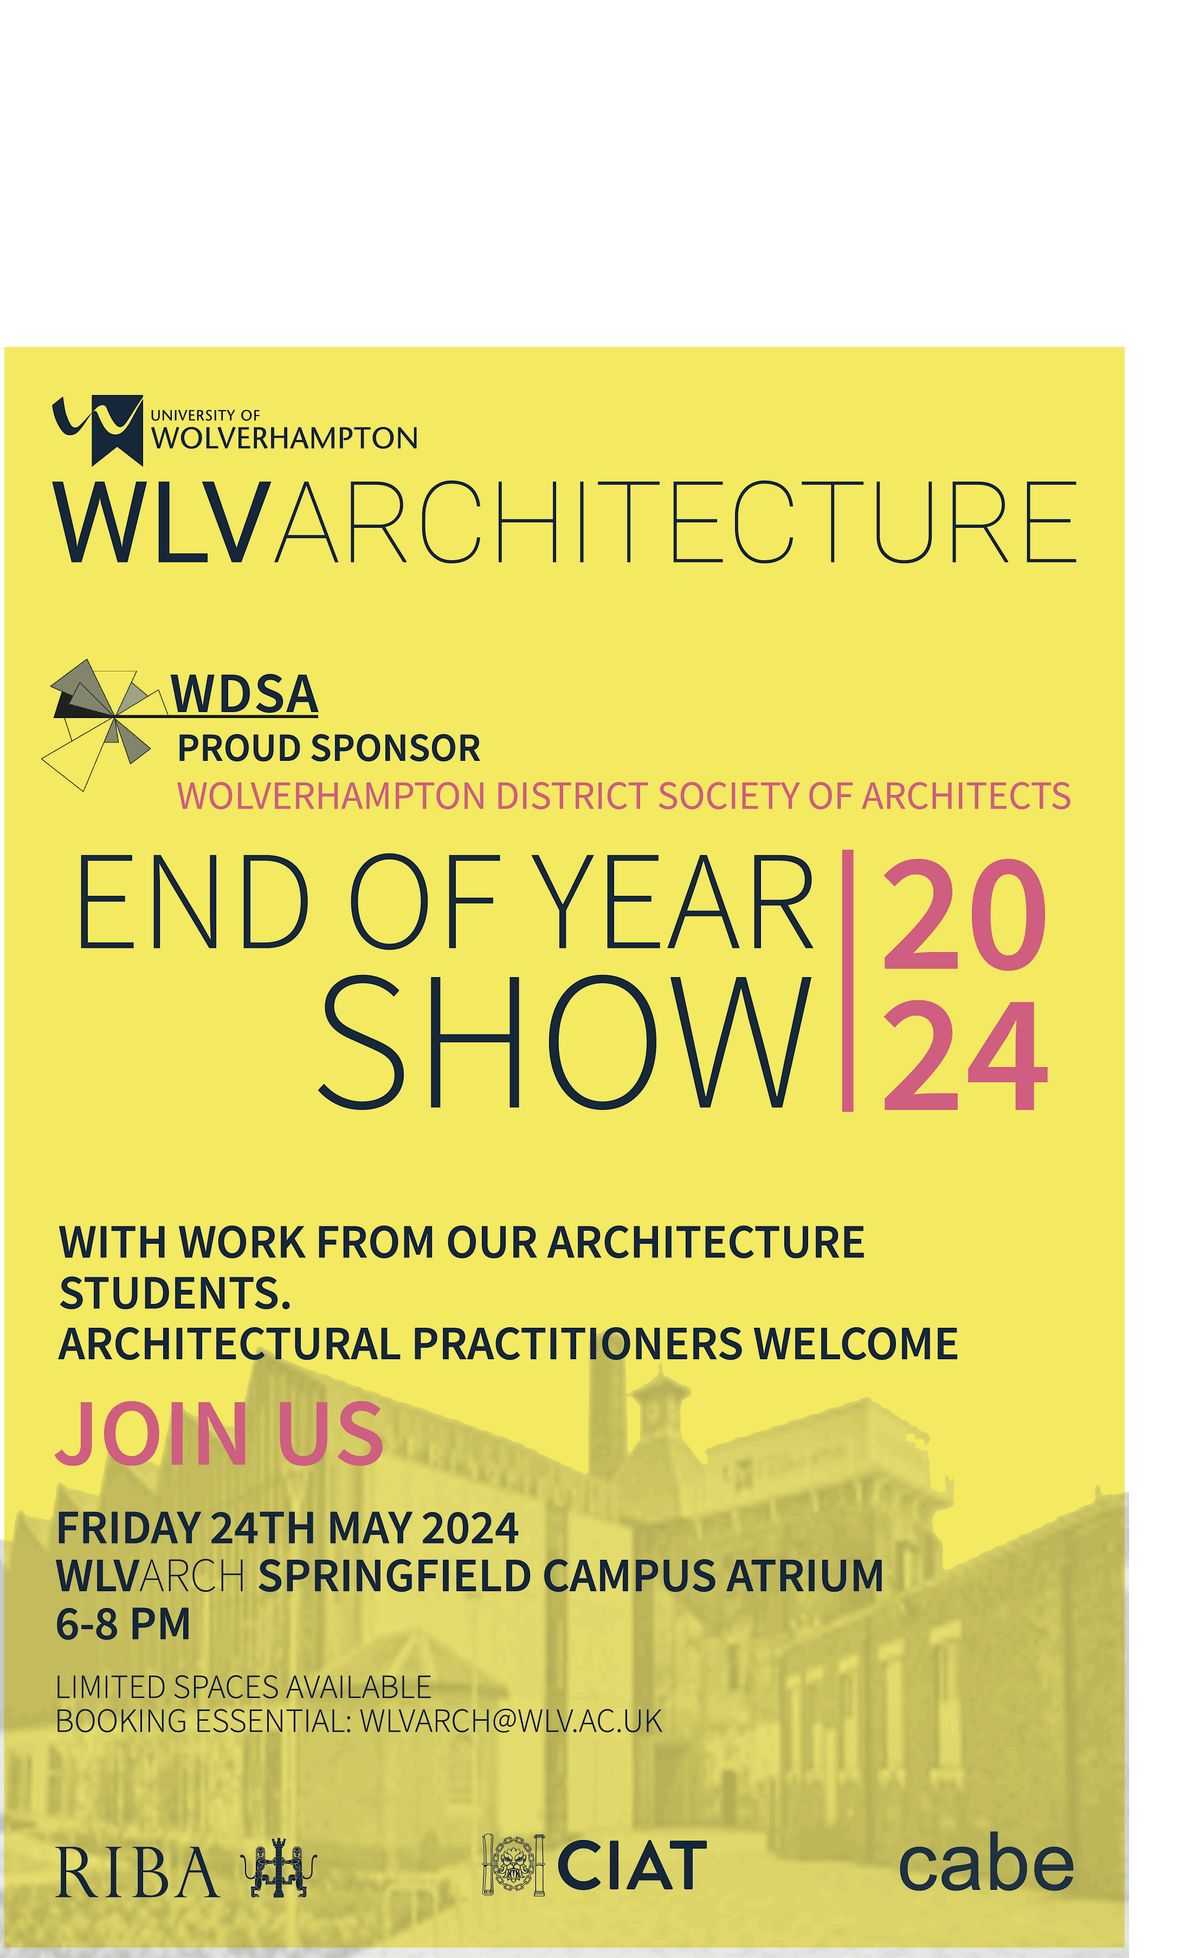 WLV ARCHITECTURE END OF YEAR SHOW 2024